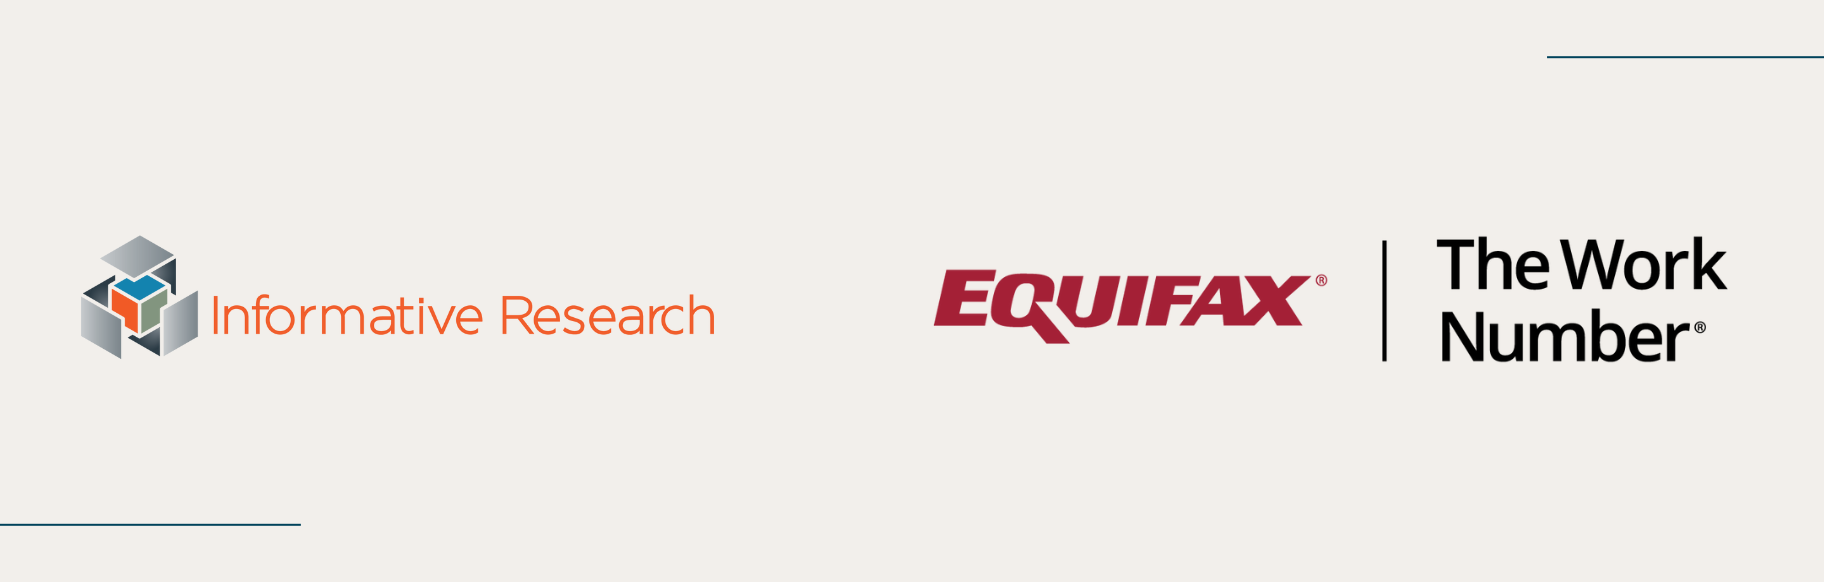 Informative Research Enhances Verification Platform through Expanded Integration with The Work Number® from Equifax